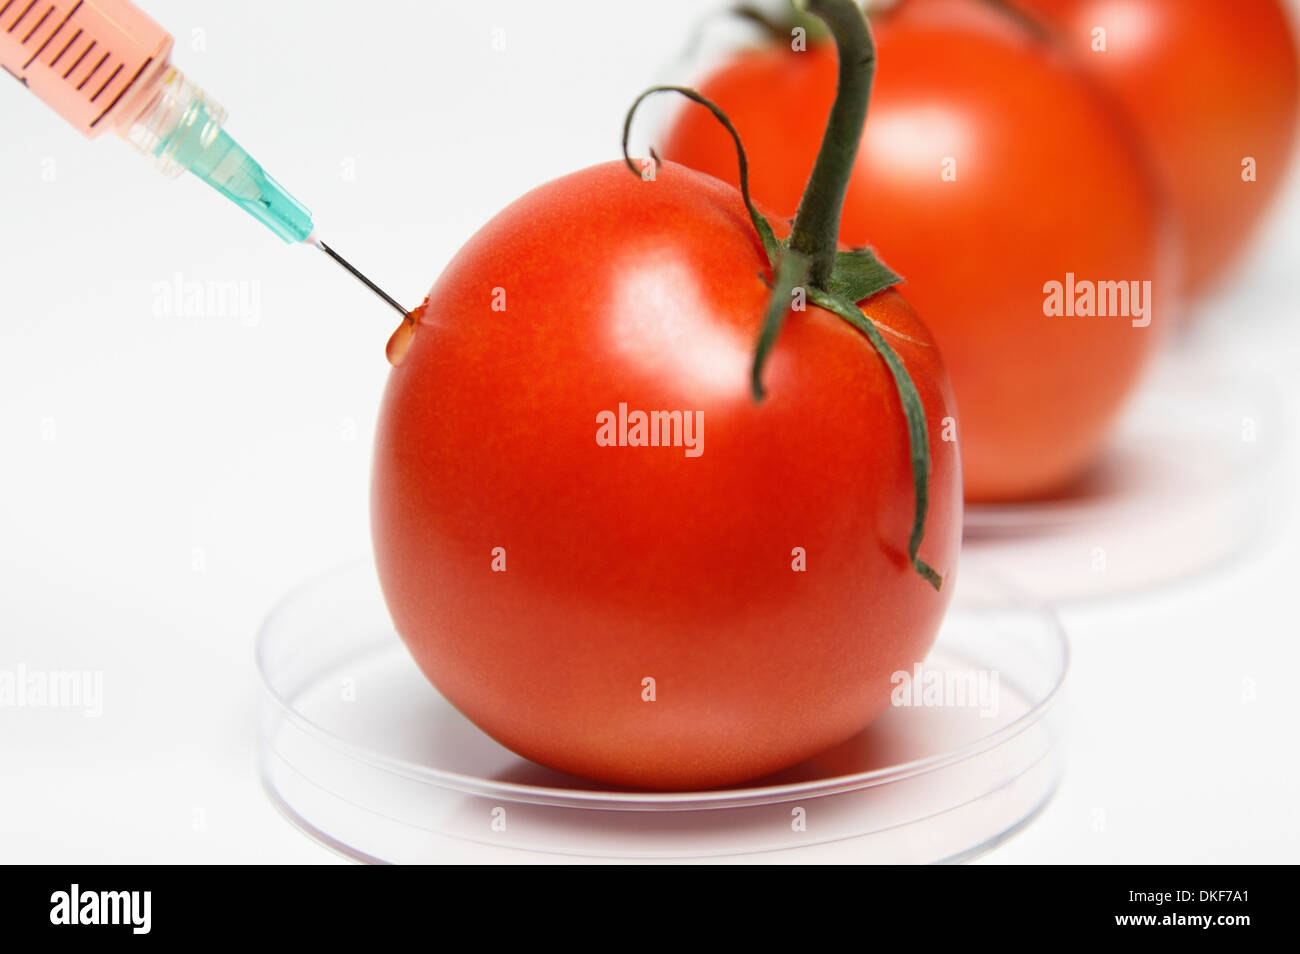 Food research: Syringe injecting red liquid into a tomato Stock Photo